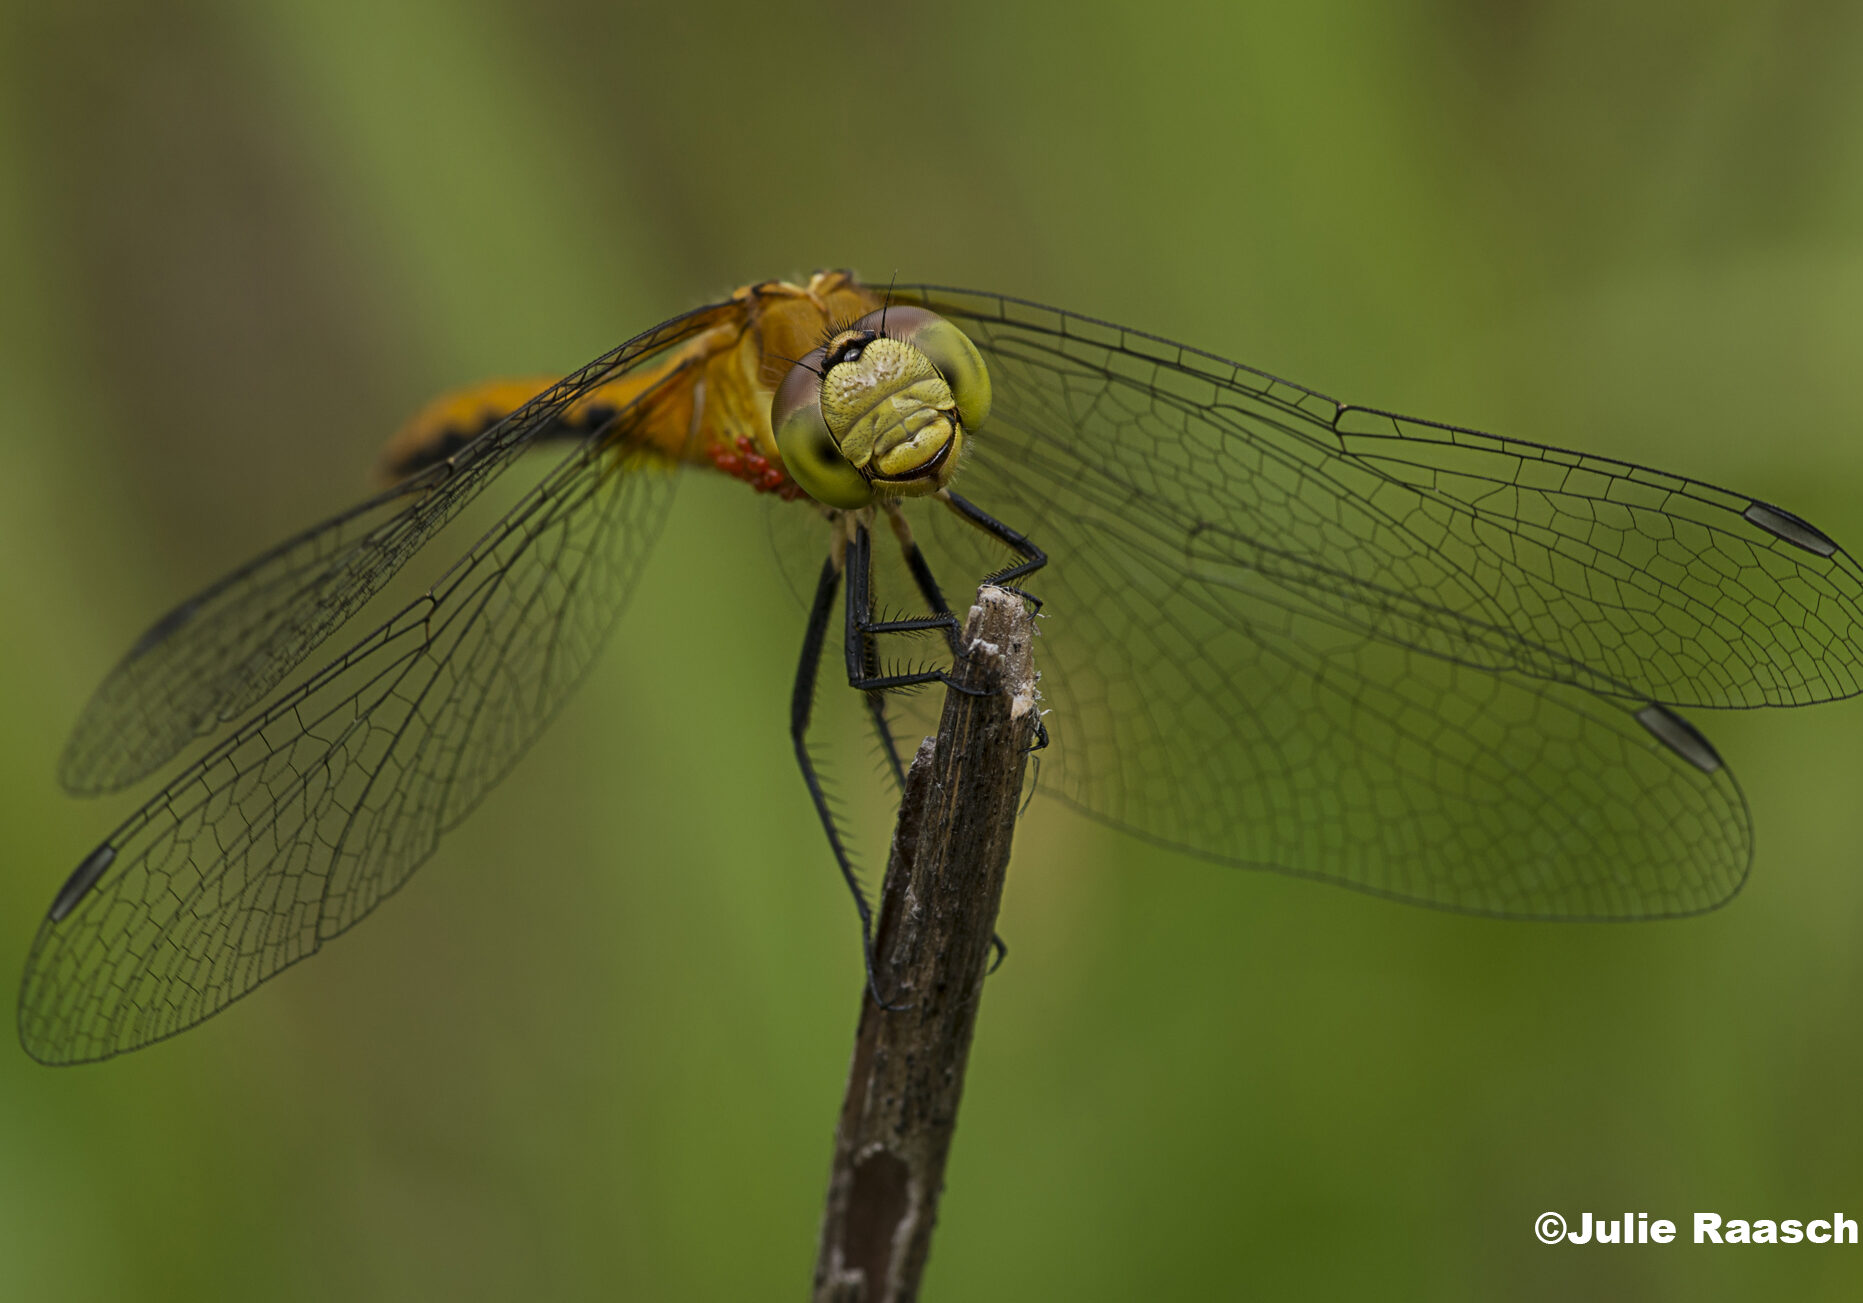 A dragonfly perches on a stick